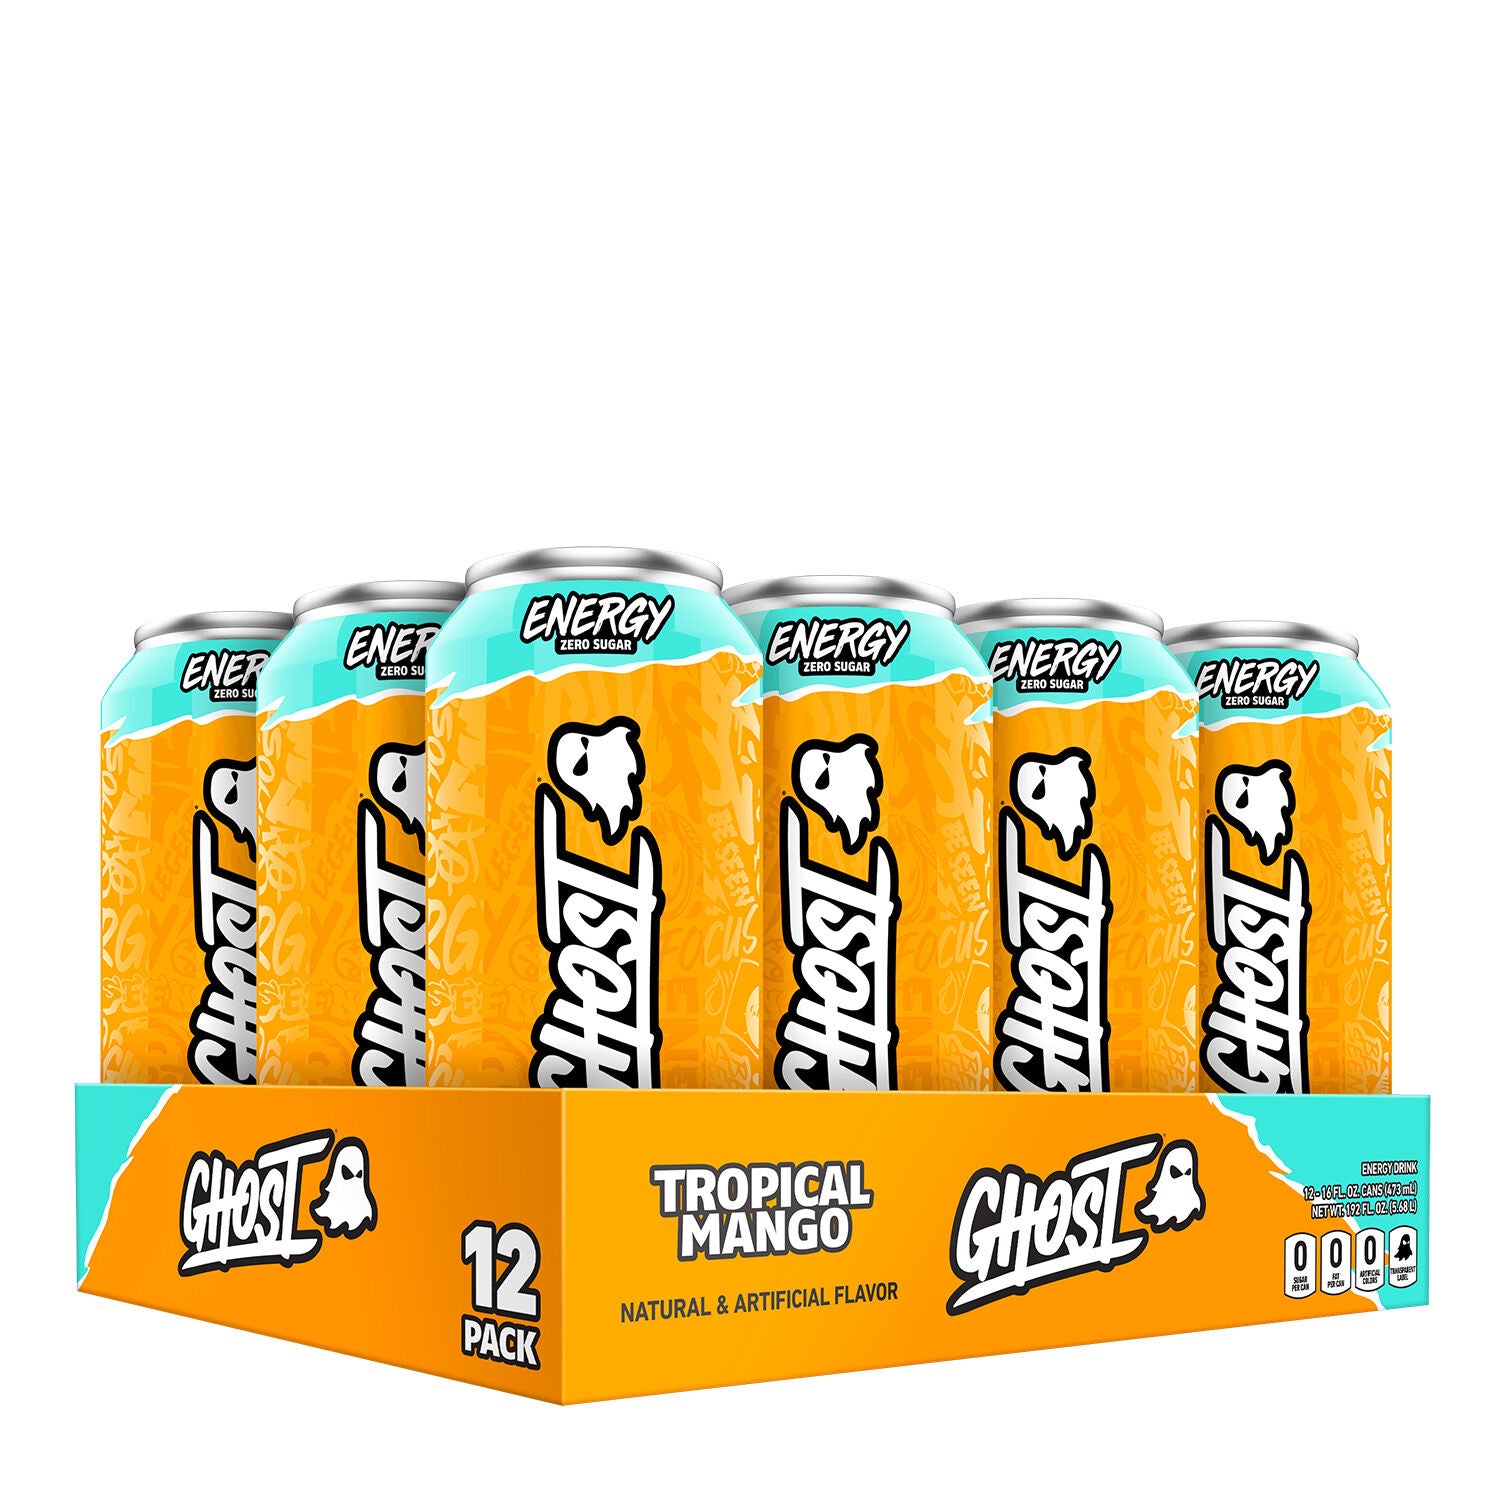 GHOST Energy Drink (1 case of 12 cans) Protein Snacks Tropical Mango GHOST